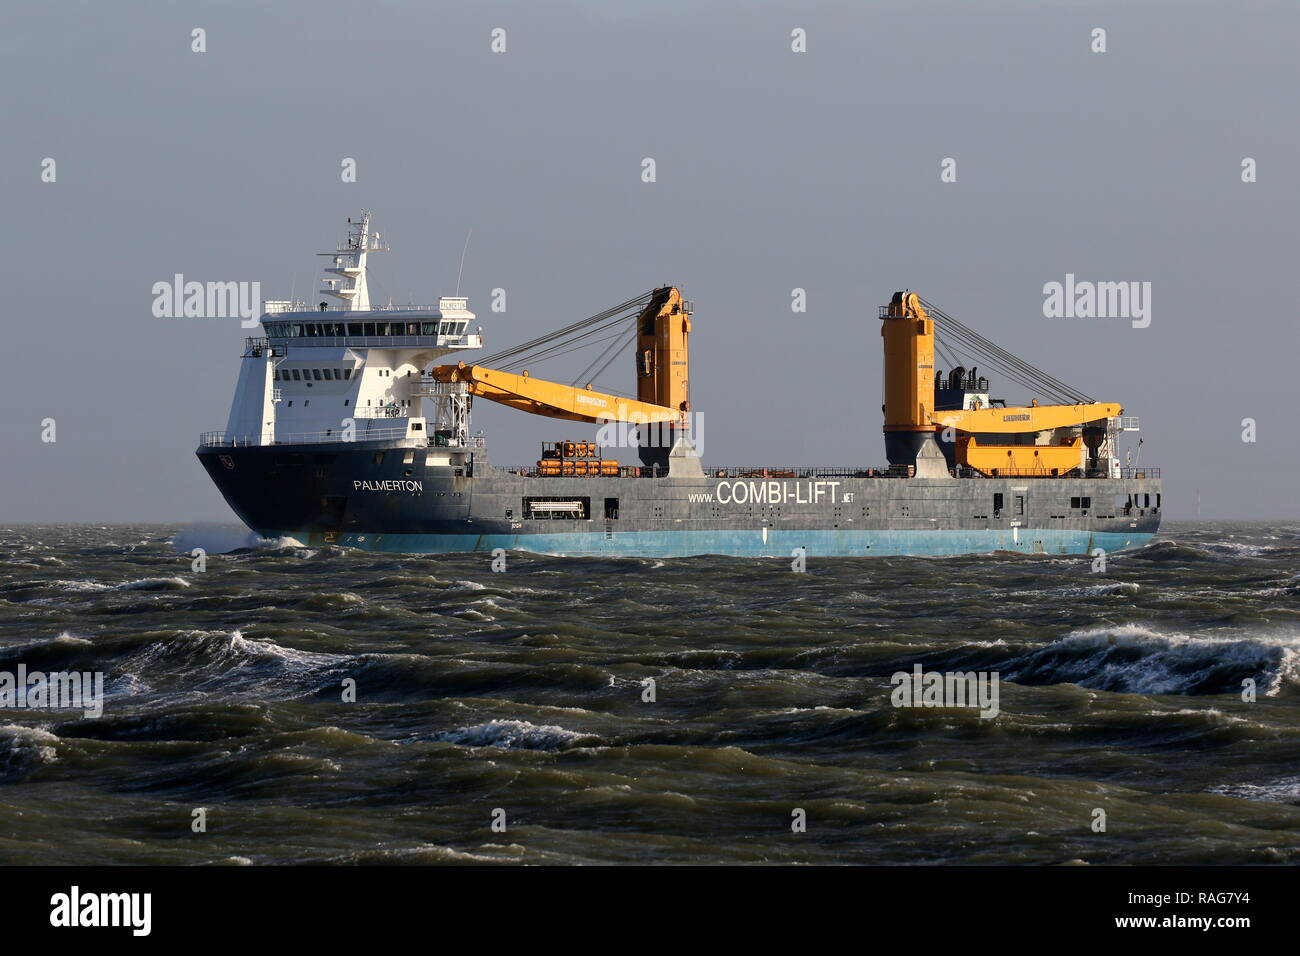 The heavy load vessel Palmerton passes Cuxhaven on 1 January 2019, a few hours before the ship suffered a machine failure in the North Sea during a st Stock Photo